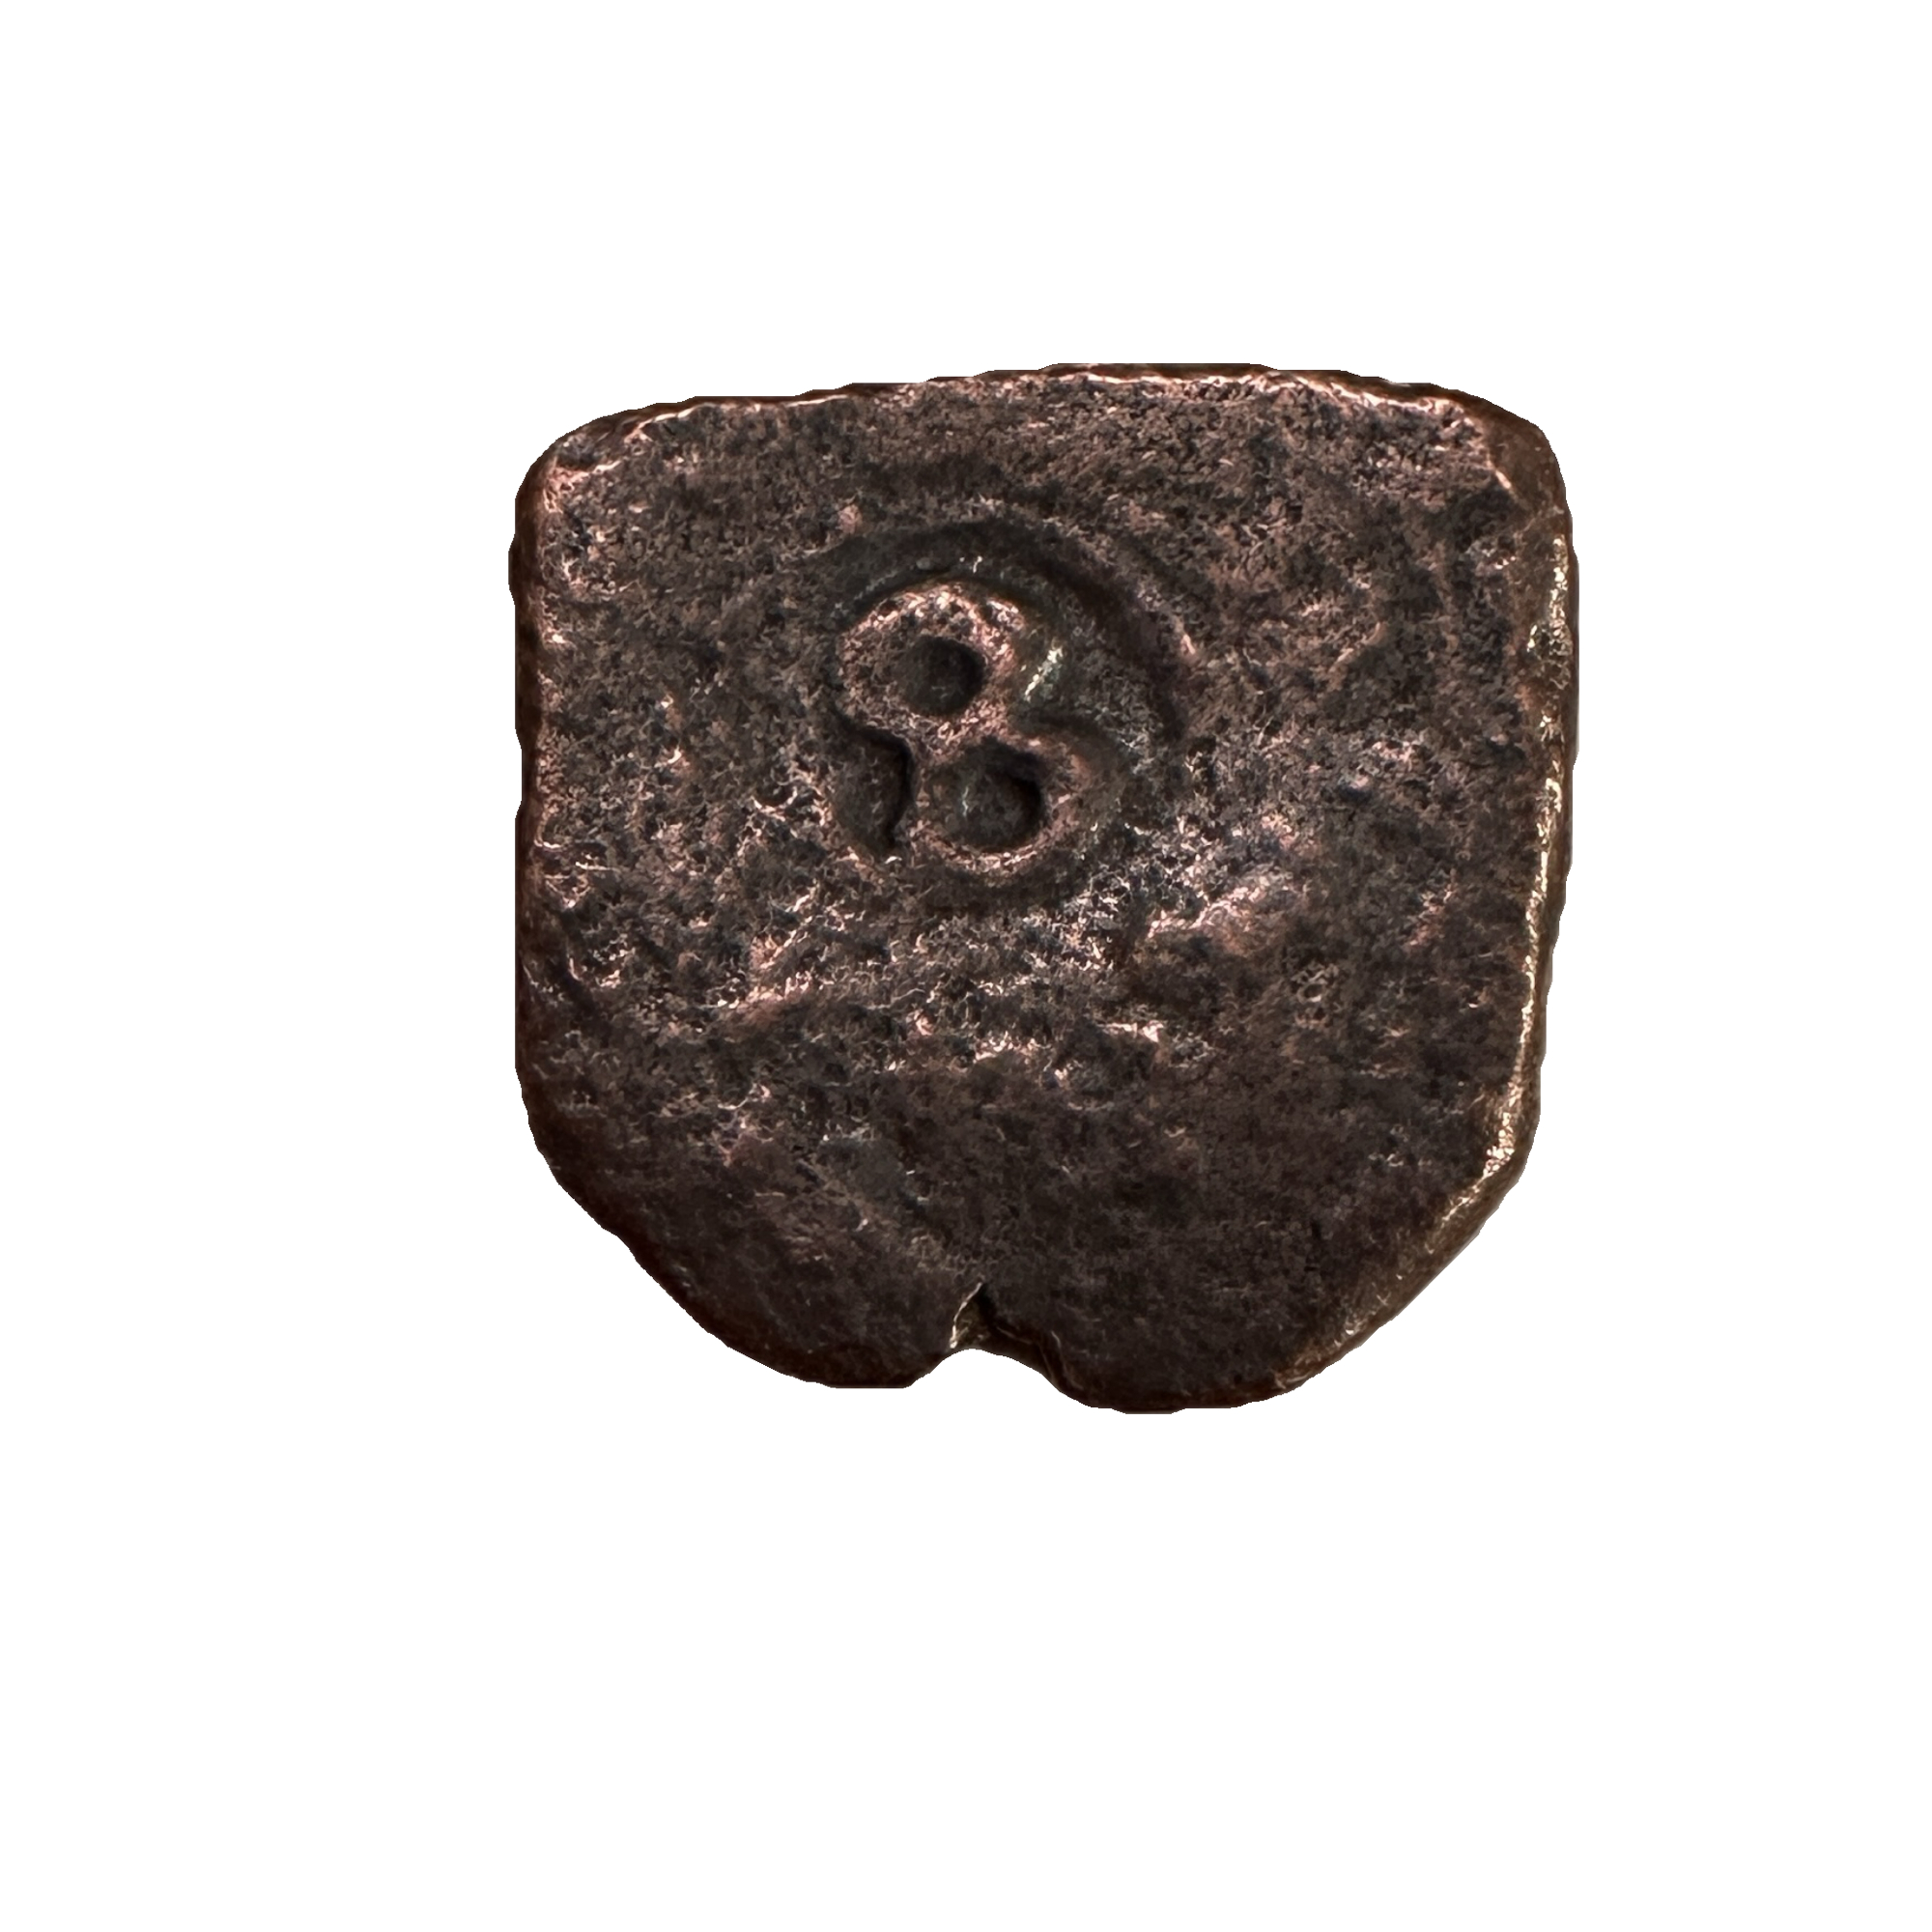 This beautiful pirate coin from Spain has an incredible figure 8 very visible on the front of the coin. This hand hammered Cob was from the 1600s.